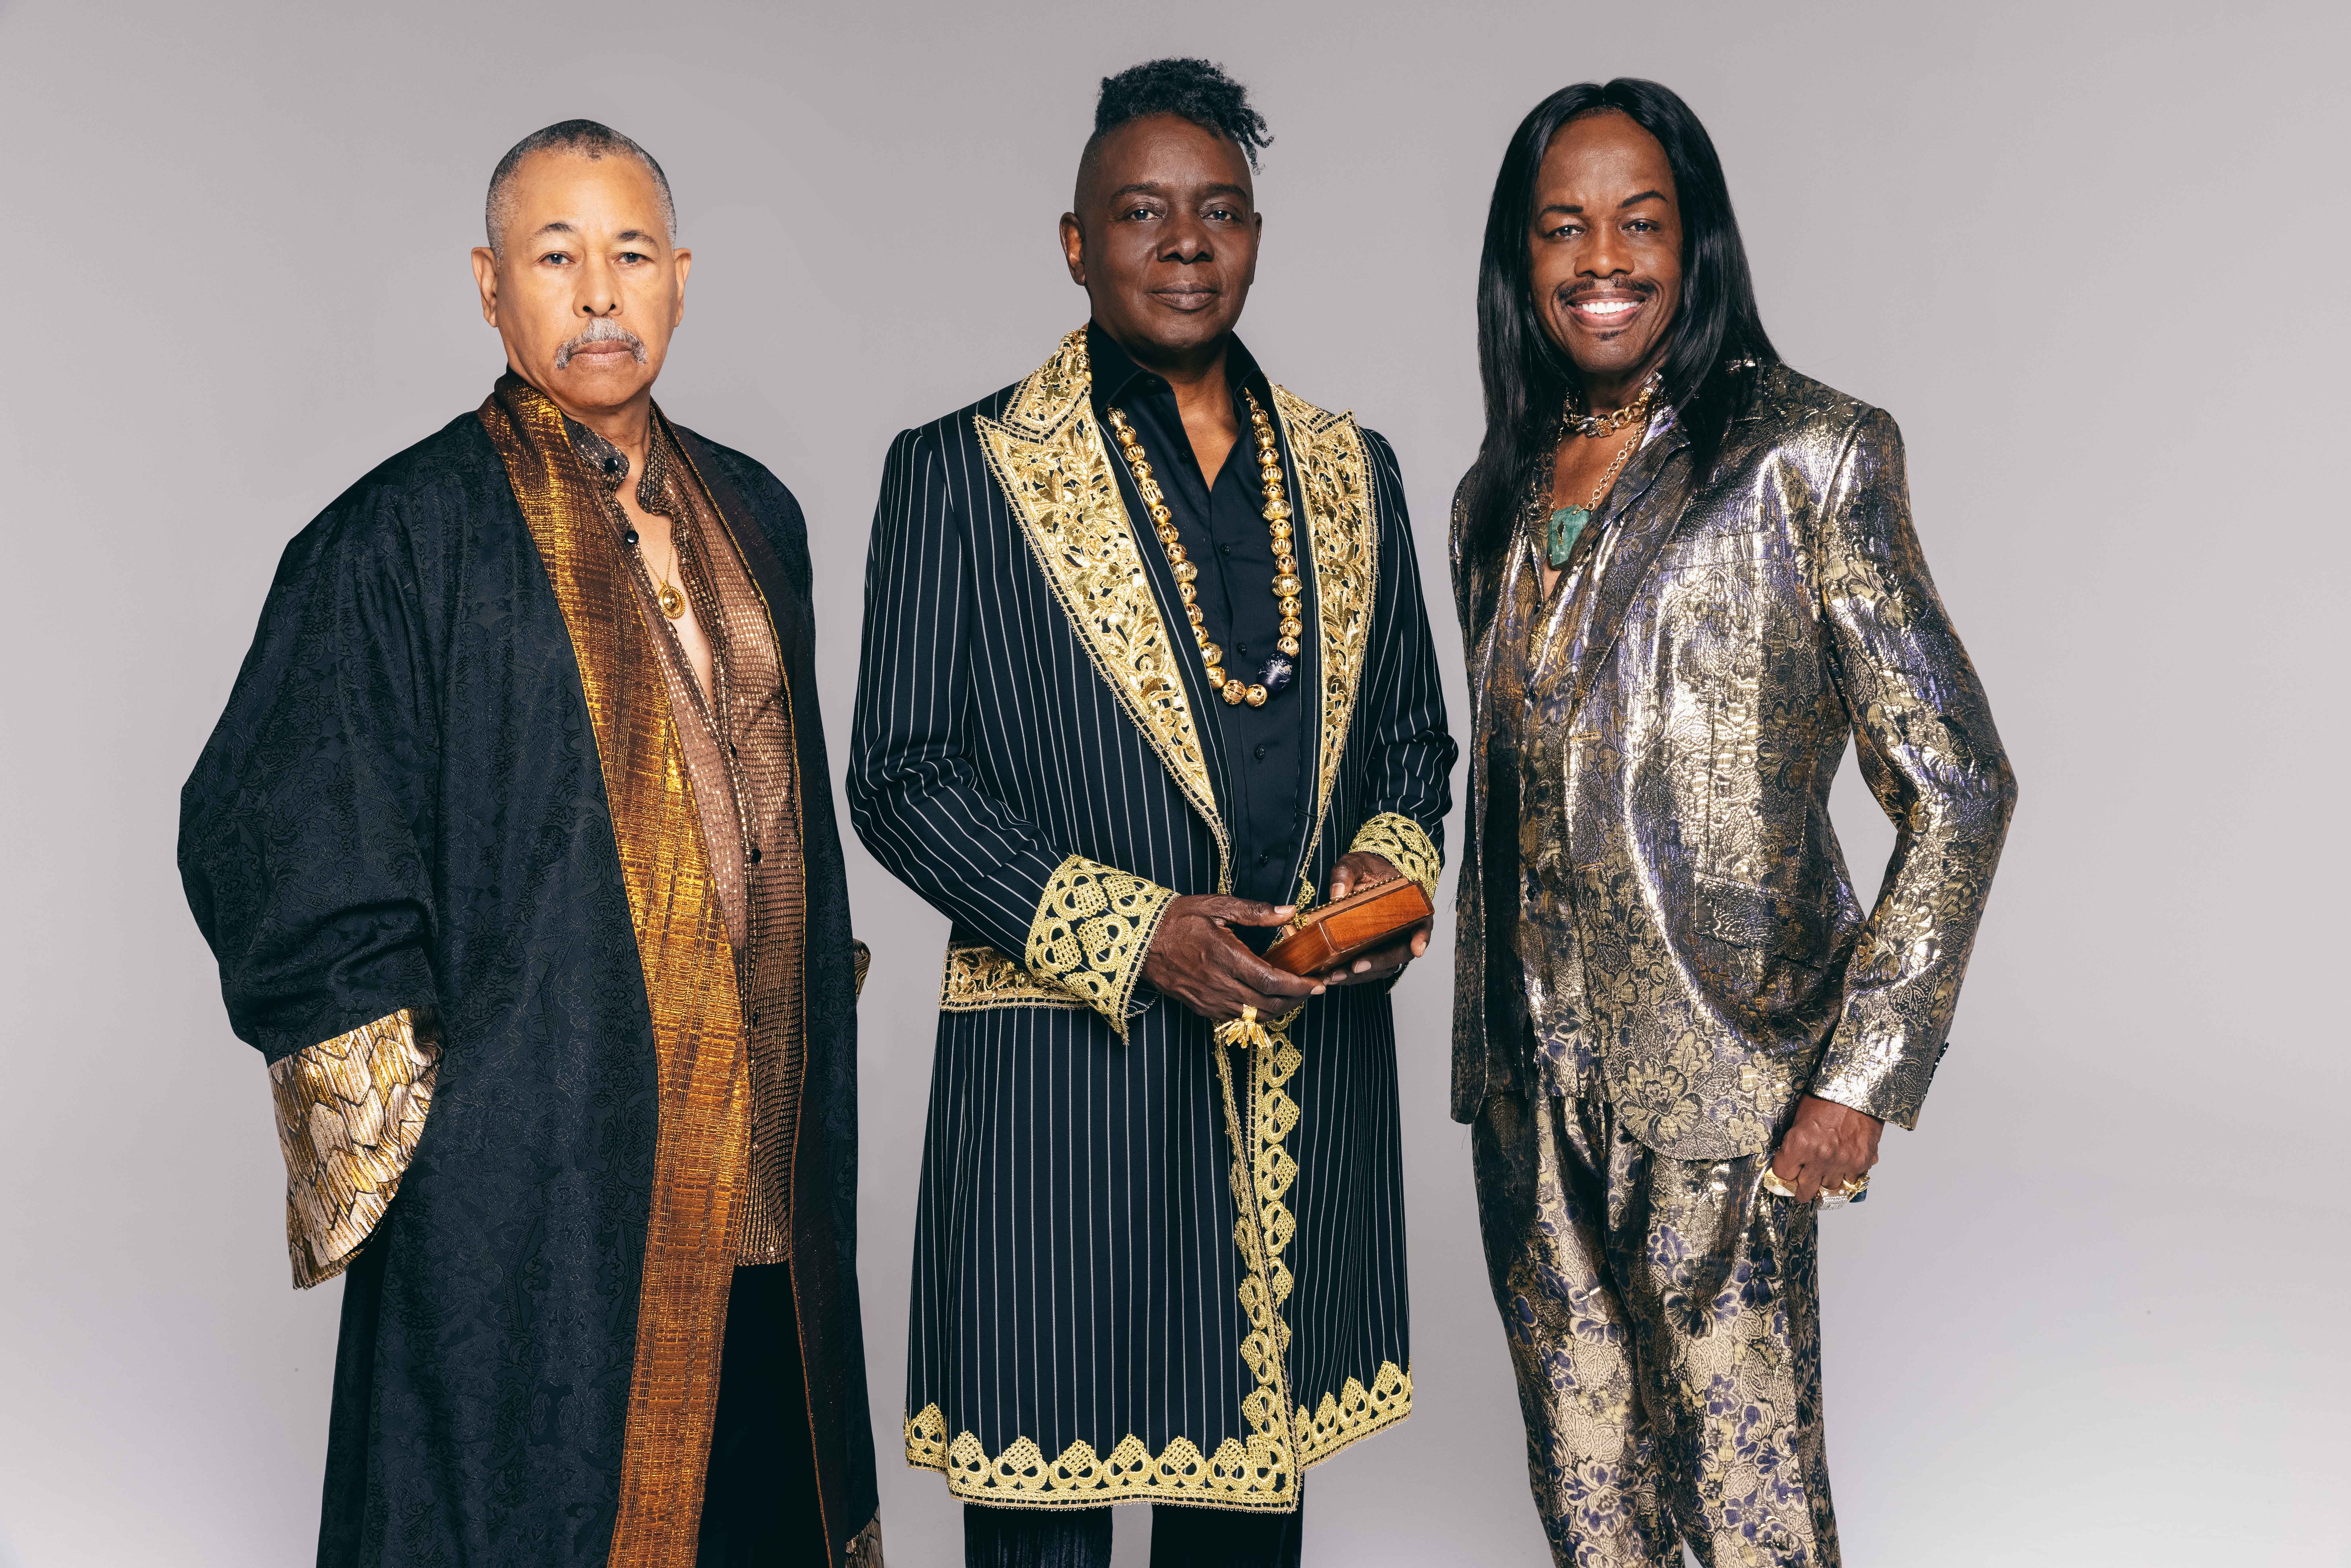 Earth, Wind & Fire free presale code for show tickets in Cincinnati, OH (PNC PAVILION)